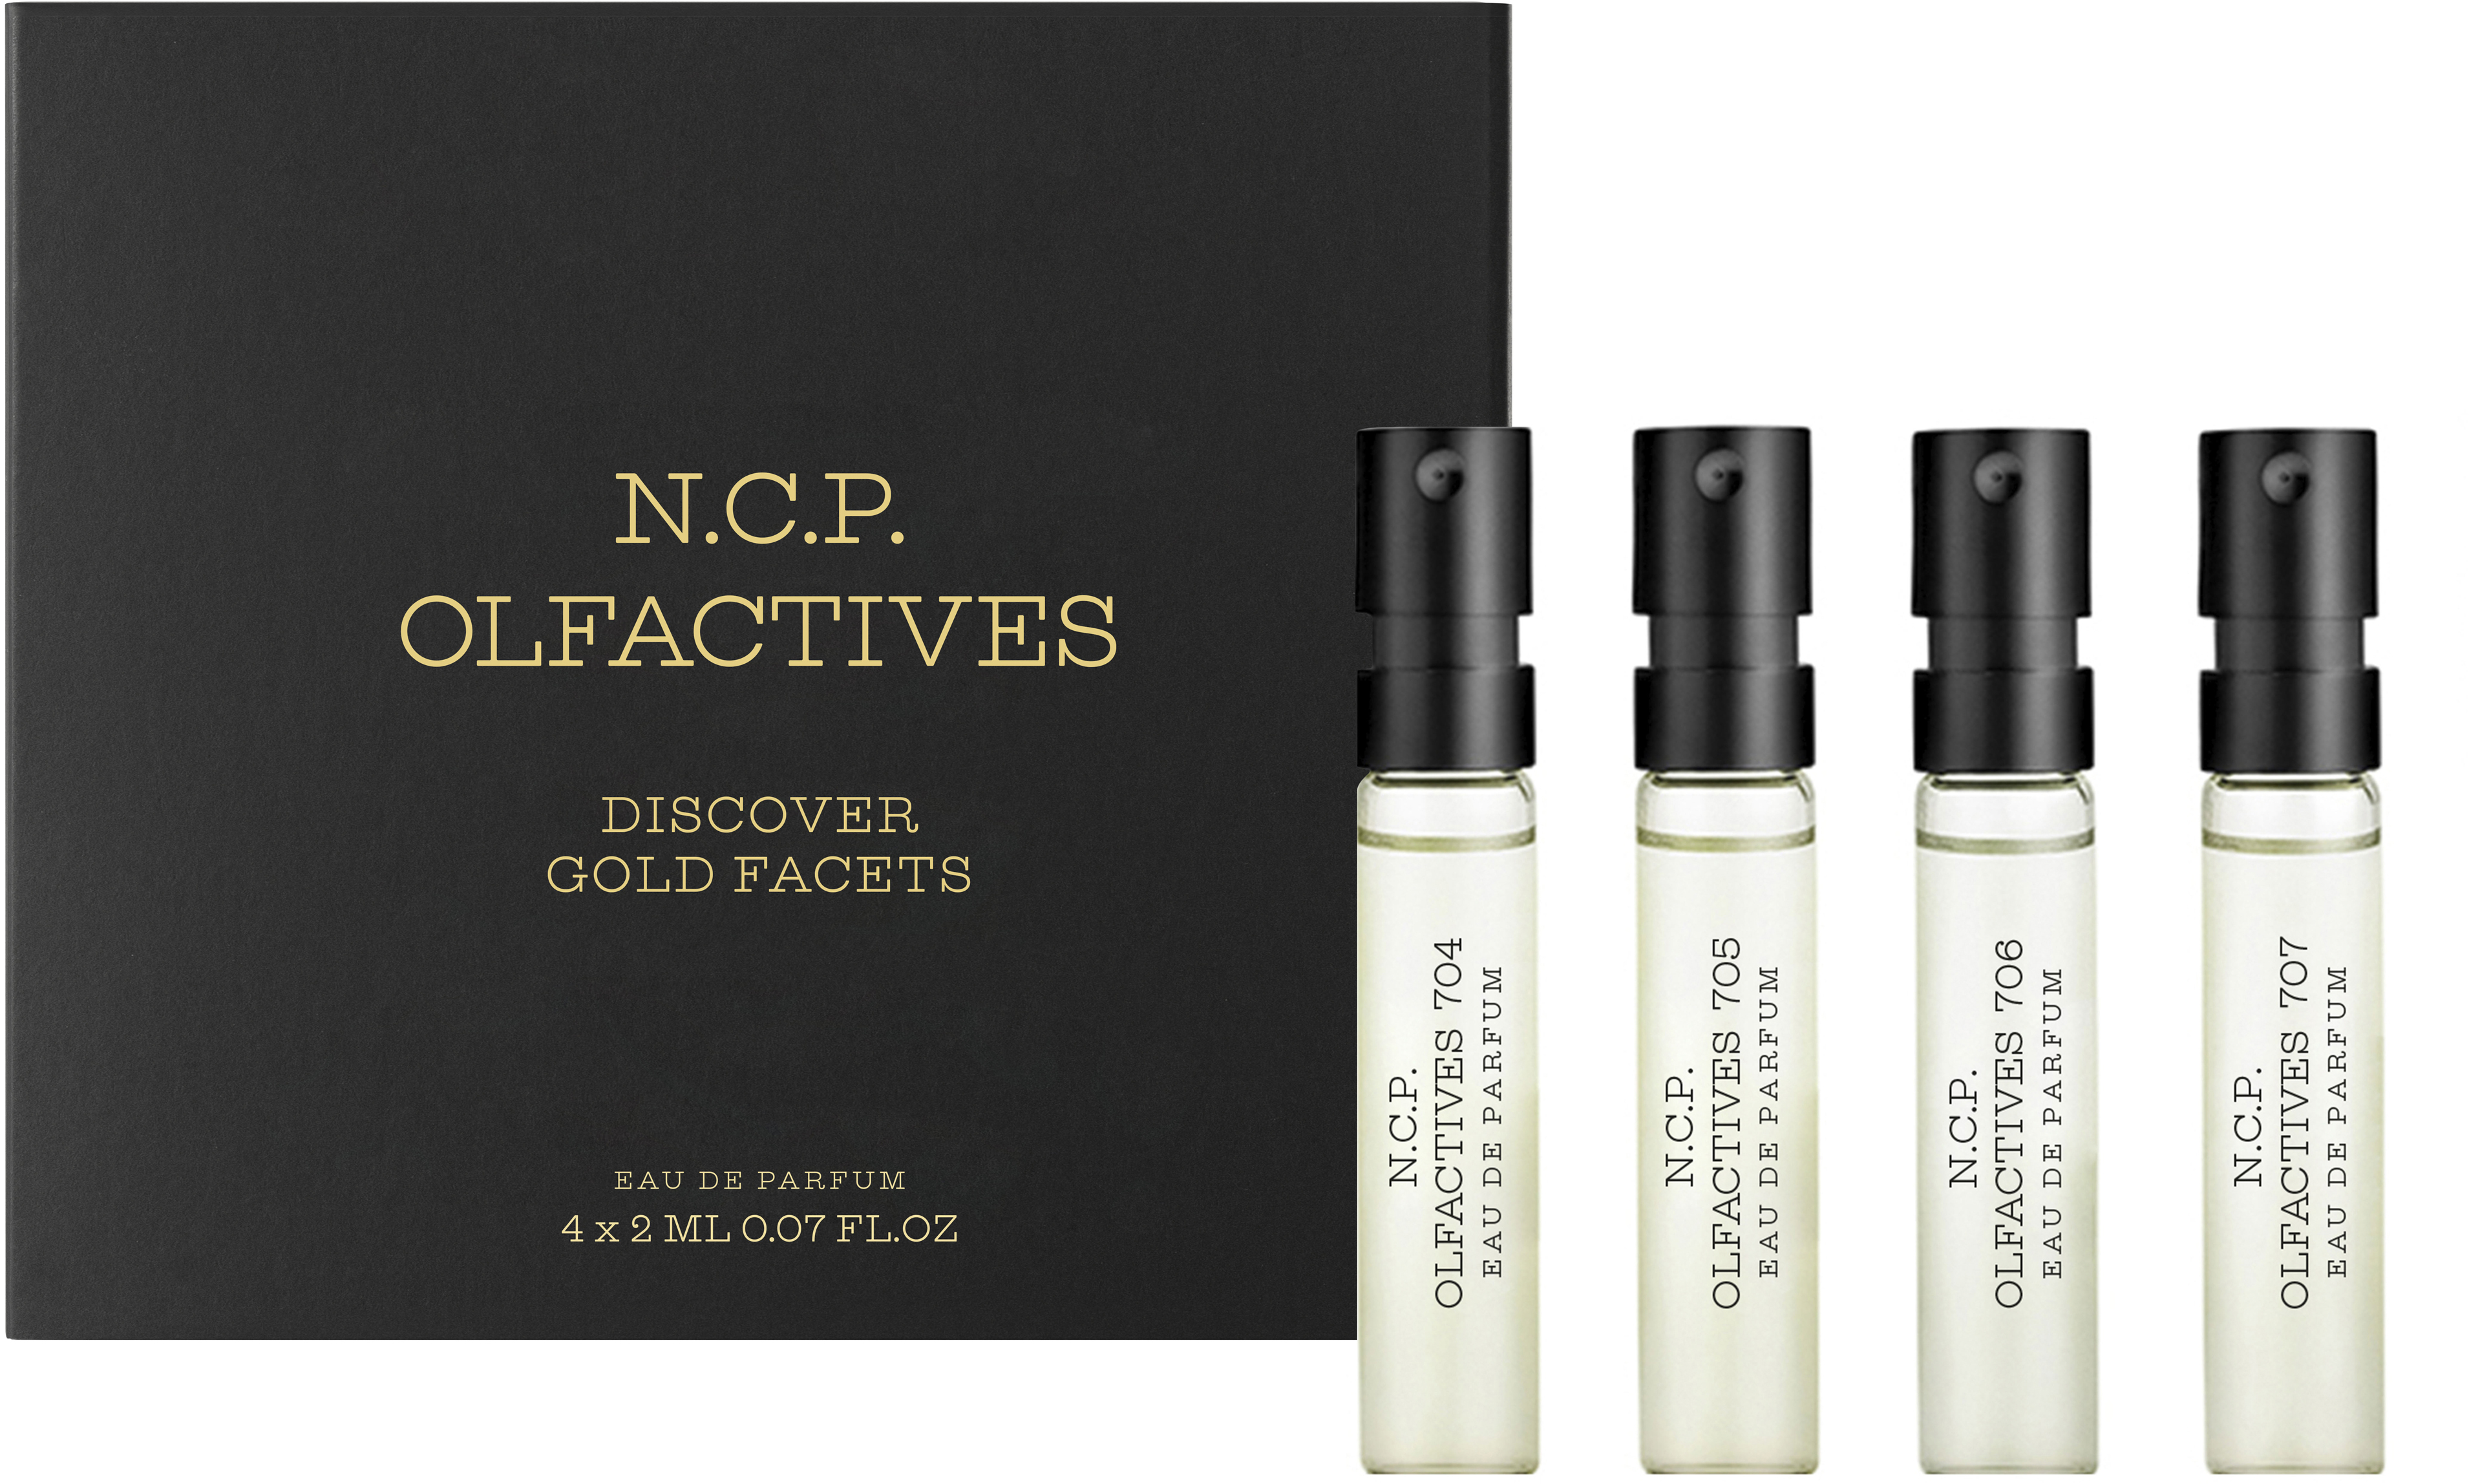 Discovery kit 2ml Gold Facets - N.C.P.